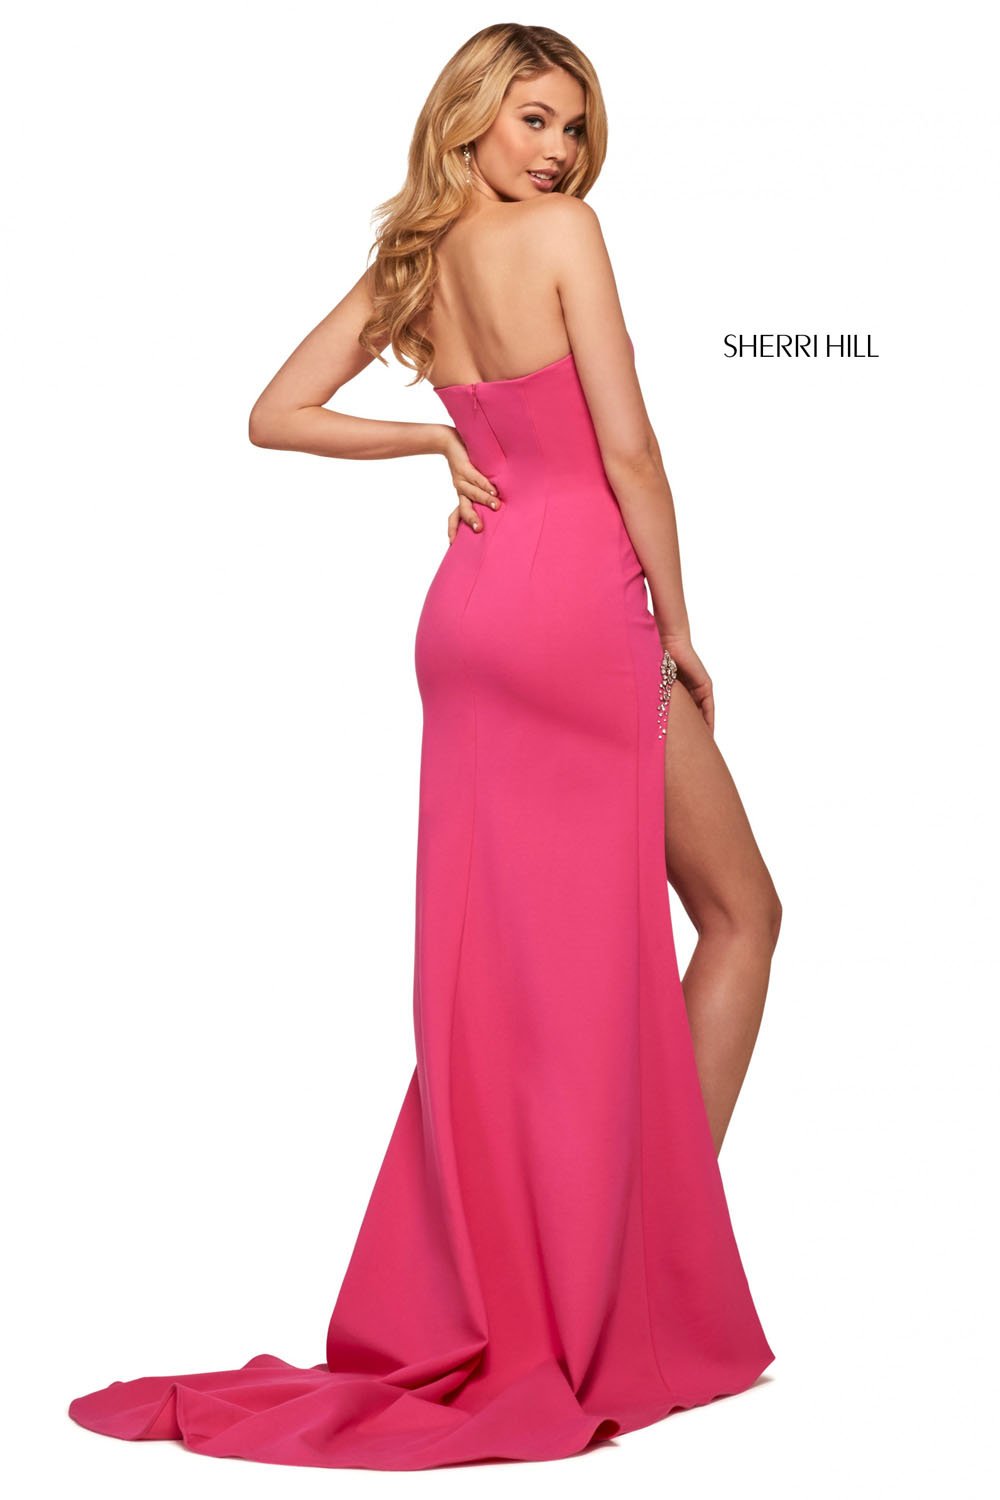 Sherri Hill 53332 dress images in these colors: Red, Light Blue, Ivory, Black, Yellow, Fuchsia, Orange.